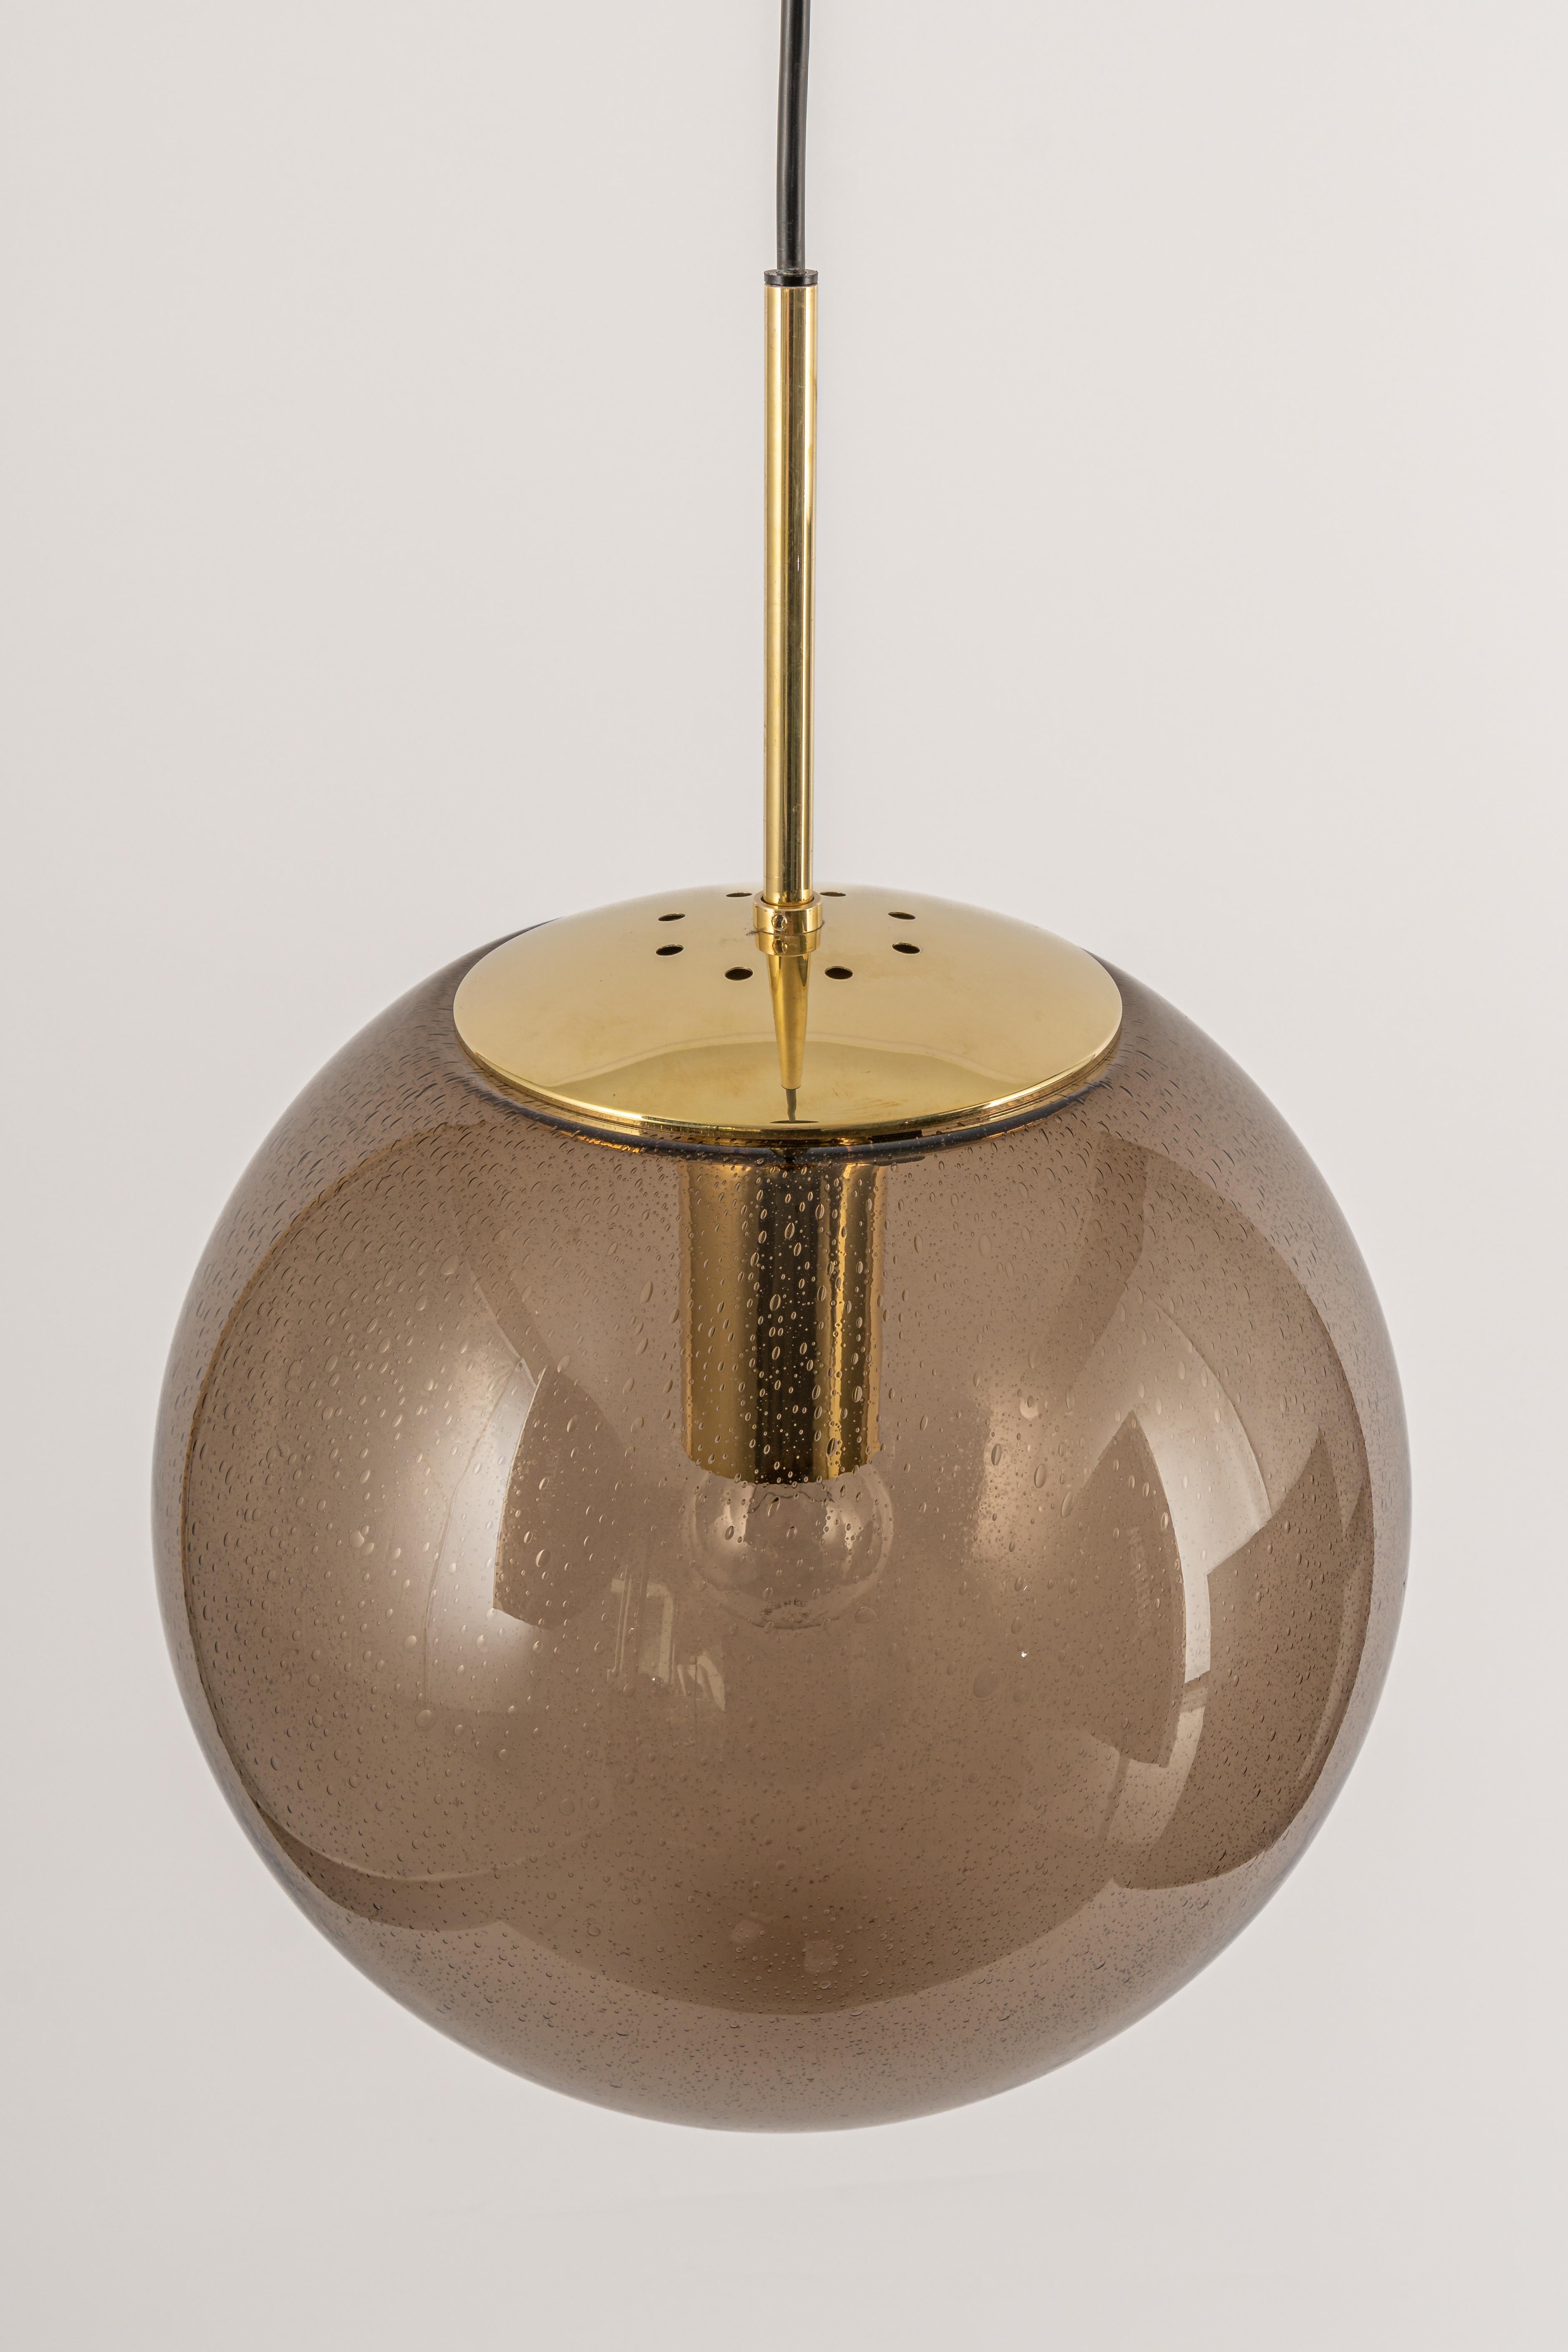 Large smoked glass ball (hand-made) pendant, manufactured by Limburg, Germany, circa 1970-1979.

Sockets: 1 x E27 Standard bulbs.
Light bulbs are not included. It is possible to install this fixture in all countries (US, UK, Europe, Asia,